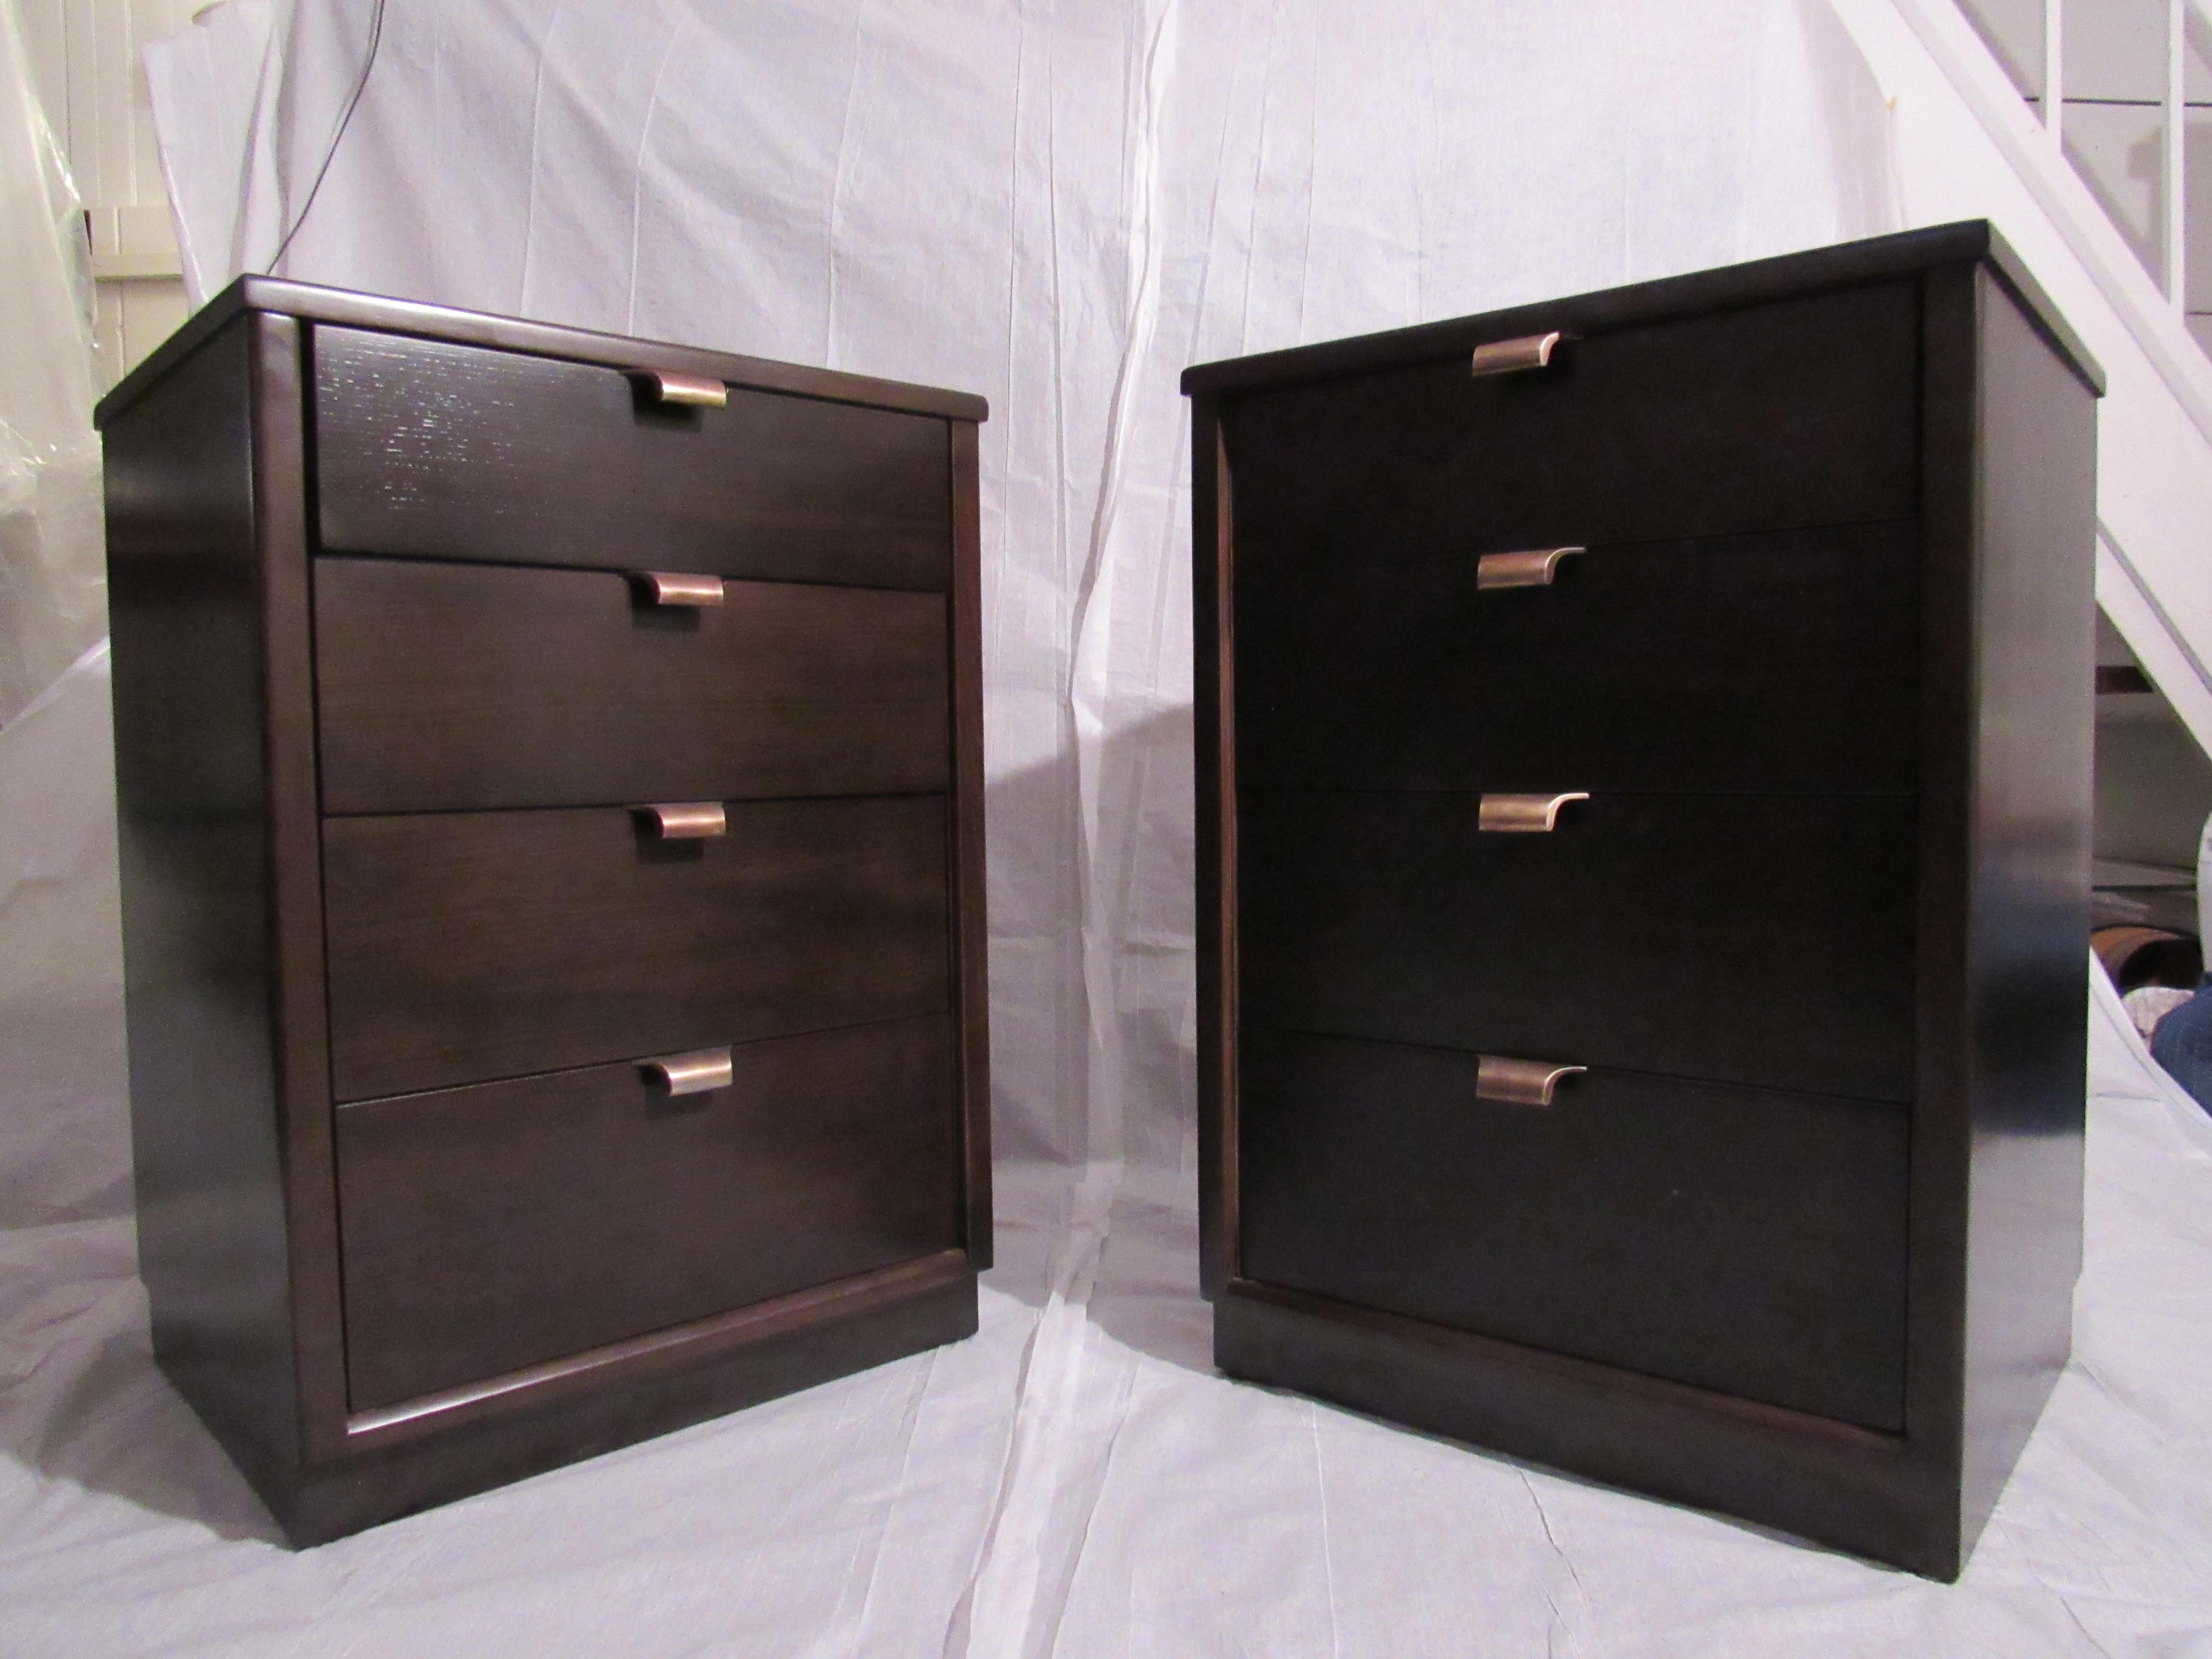 Edward Wormley pair of nightstands for the Precedent collection by Drexel, circa 1947
The pair of silver elm nightstands have been refinished in a black brown espresso finish with polished brass hardware. 
The nightstands are in very good